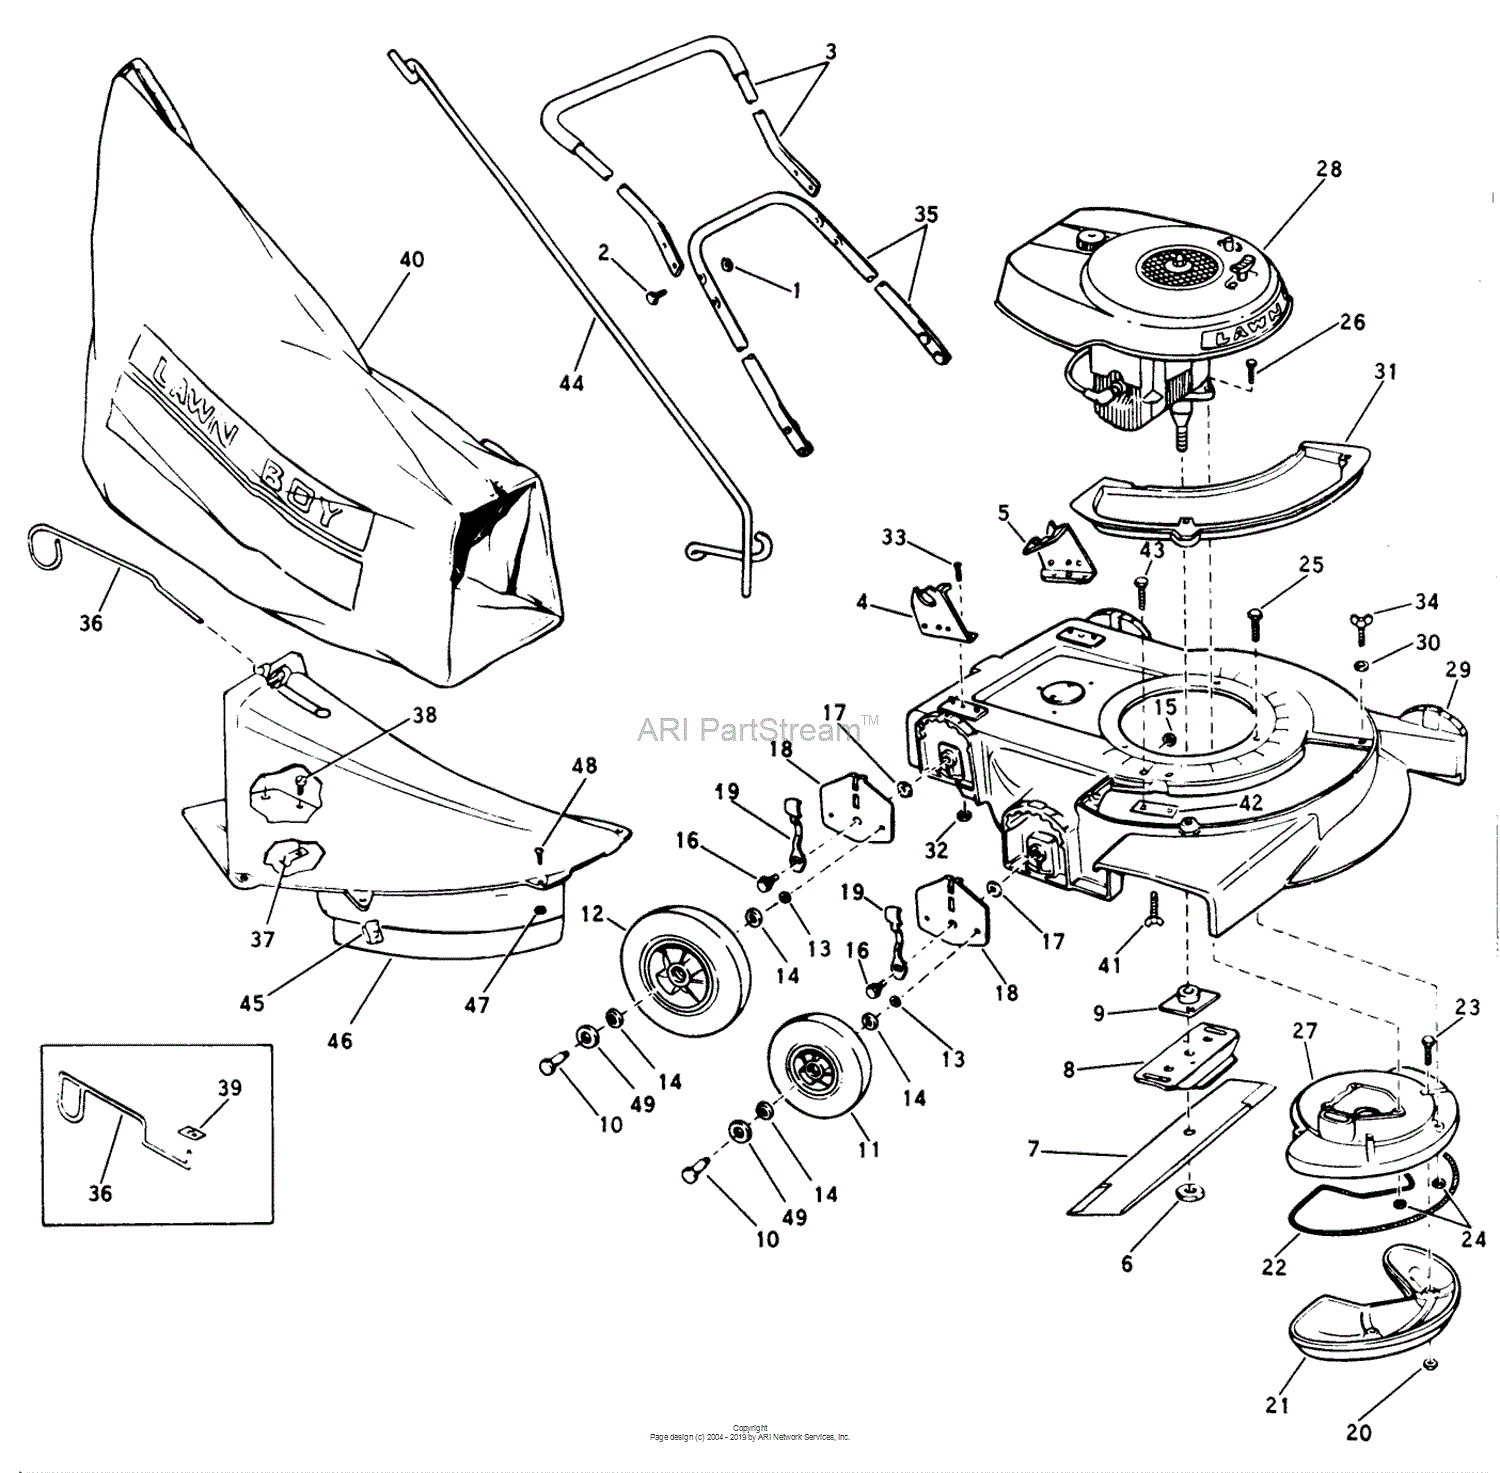 Related Images with Lawn Boy Mower Parts Engine Diagram.